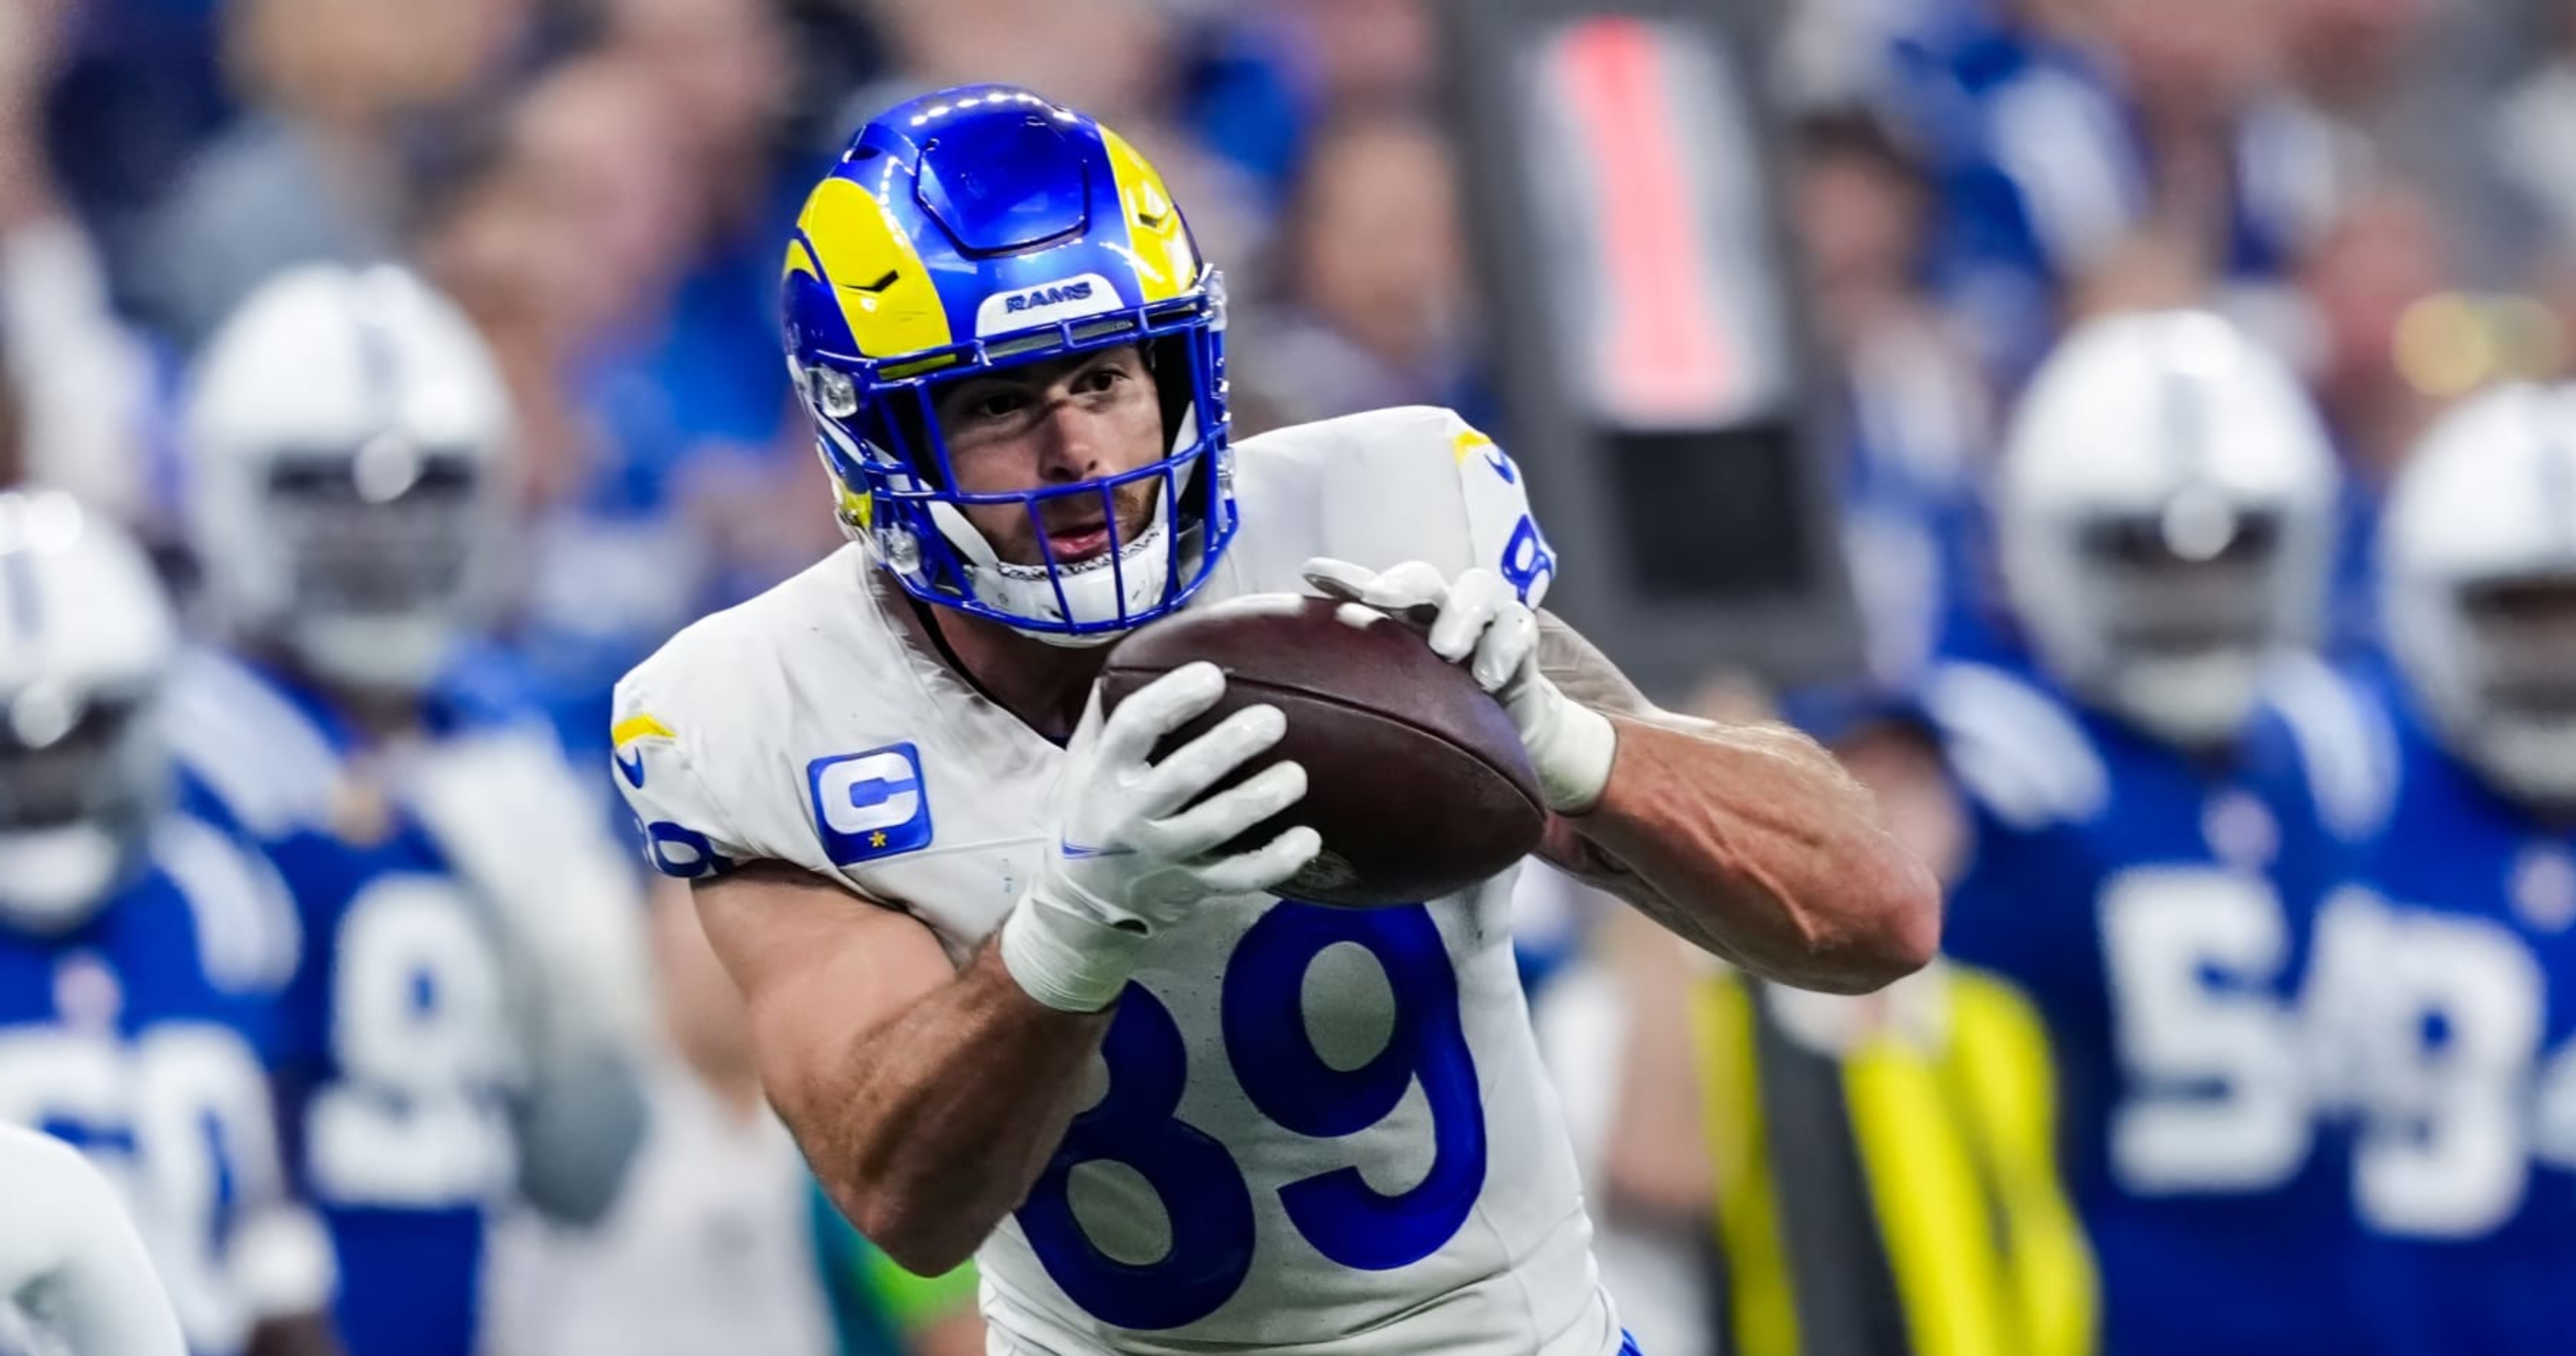 Fantasy Football Picks Today: Top DraftKings NFL DFS Targets, Values for  Week 2 - DraftKings Network